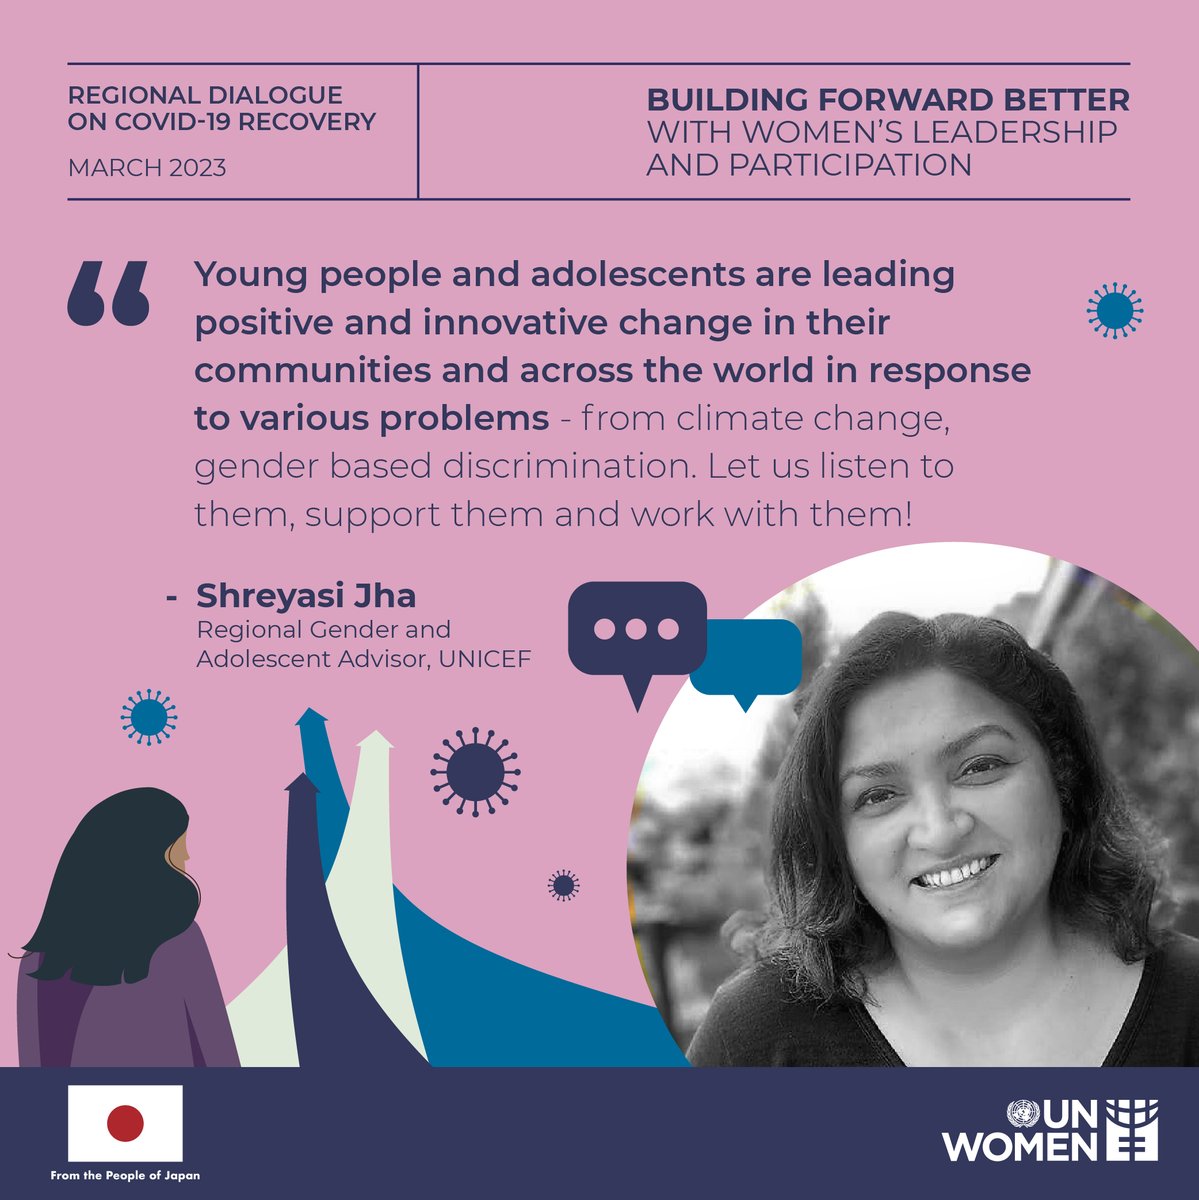 COVID-19 significantly impacted youth. We need their vision and leadership now more than ever.

Shreyasi Jha from @UNICEF_EAPRO calls for us to listen to, support and work with young people for an inclusive recovery.

Read more 🔗 unwo.men/eXTJ50NA5aS